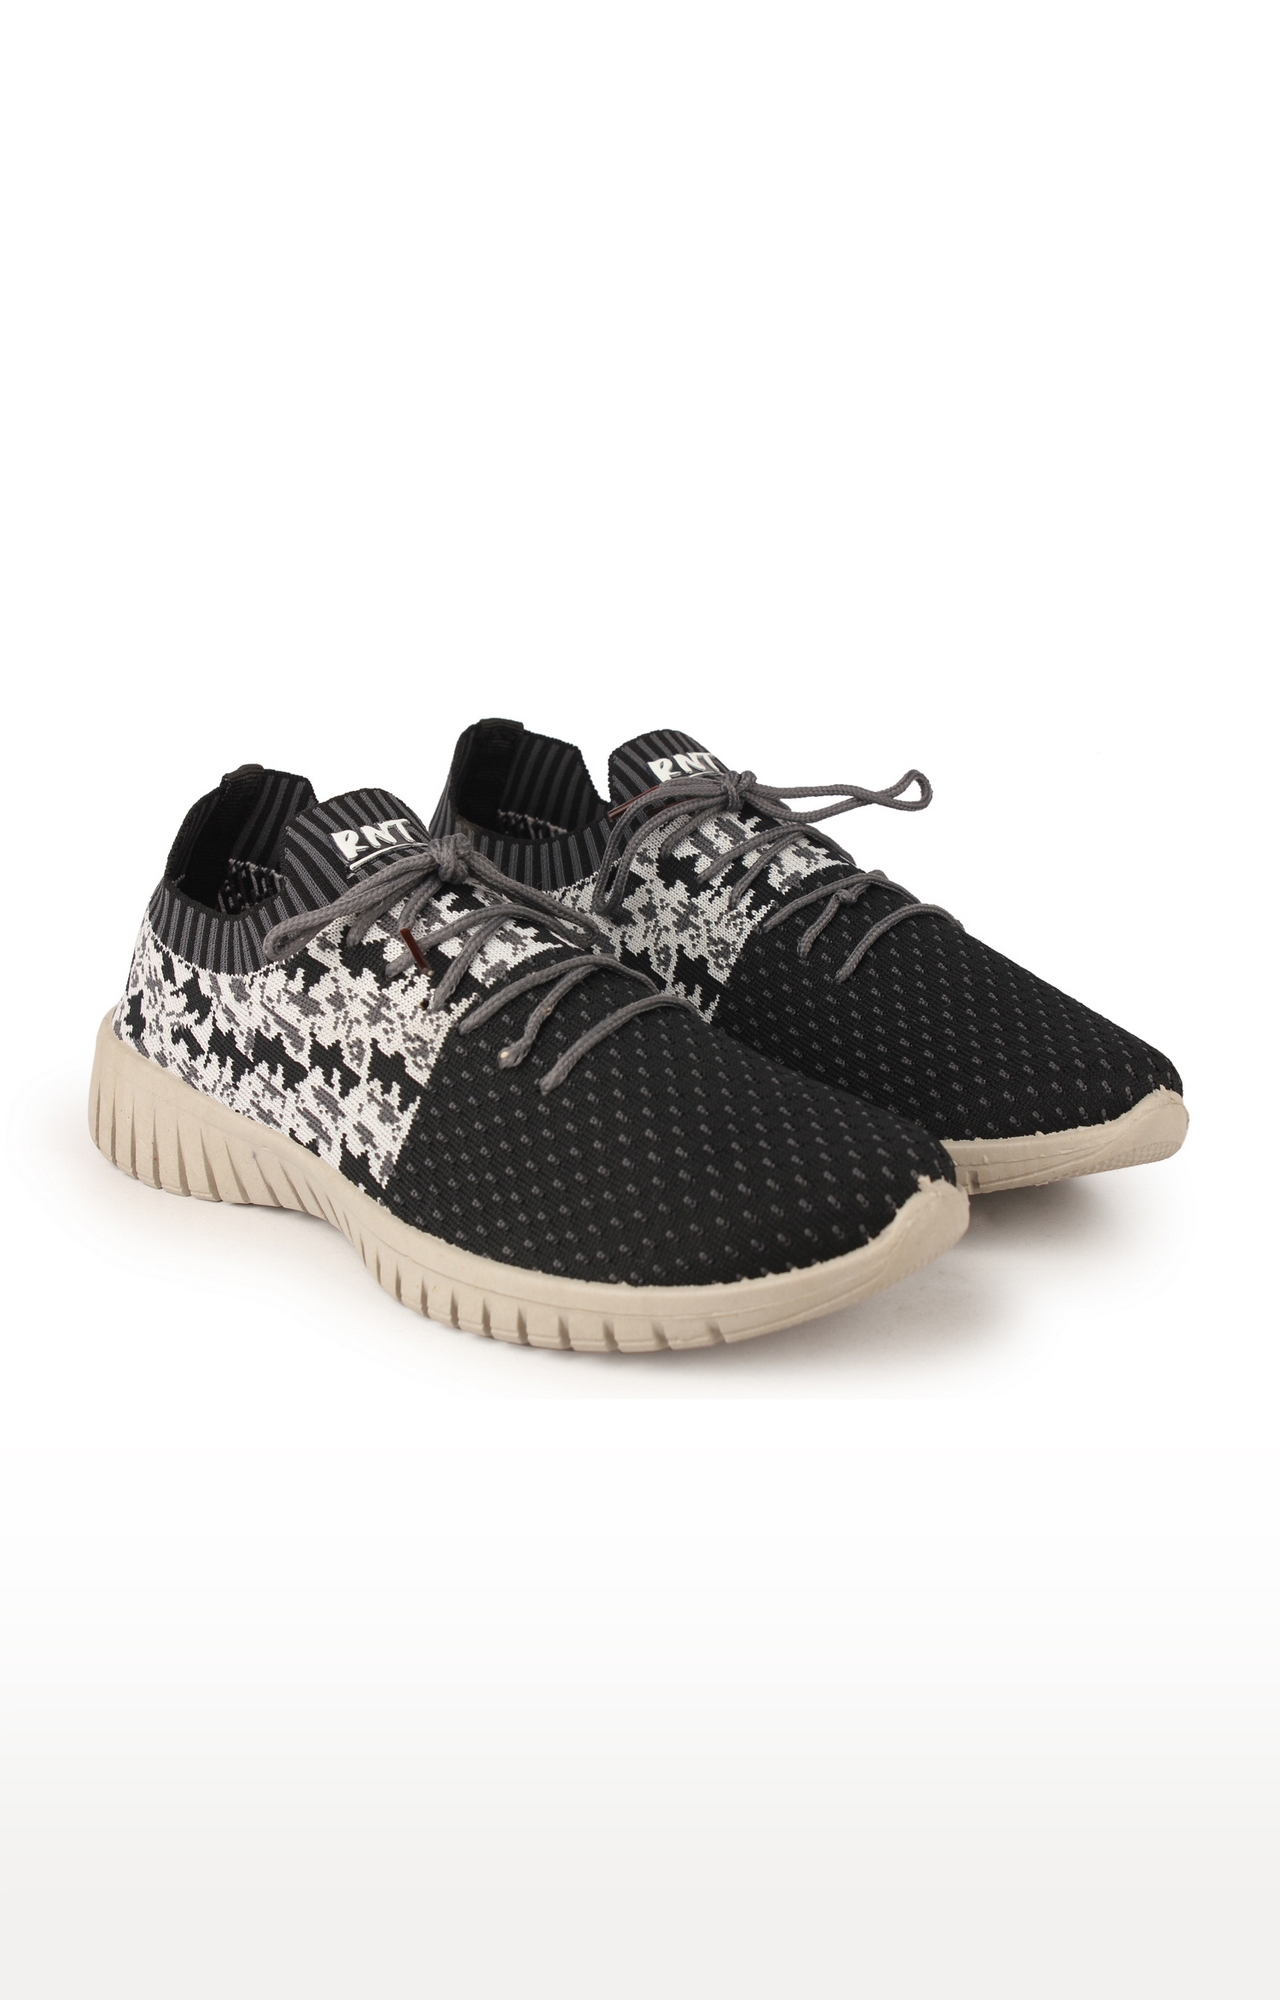 RNT | RNT Lili Black and Grey Shoes for Women